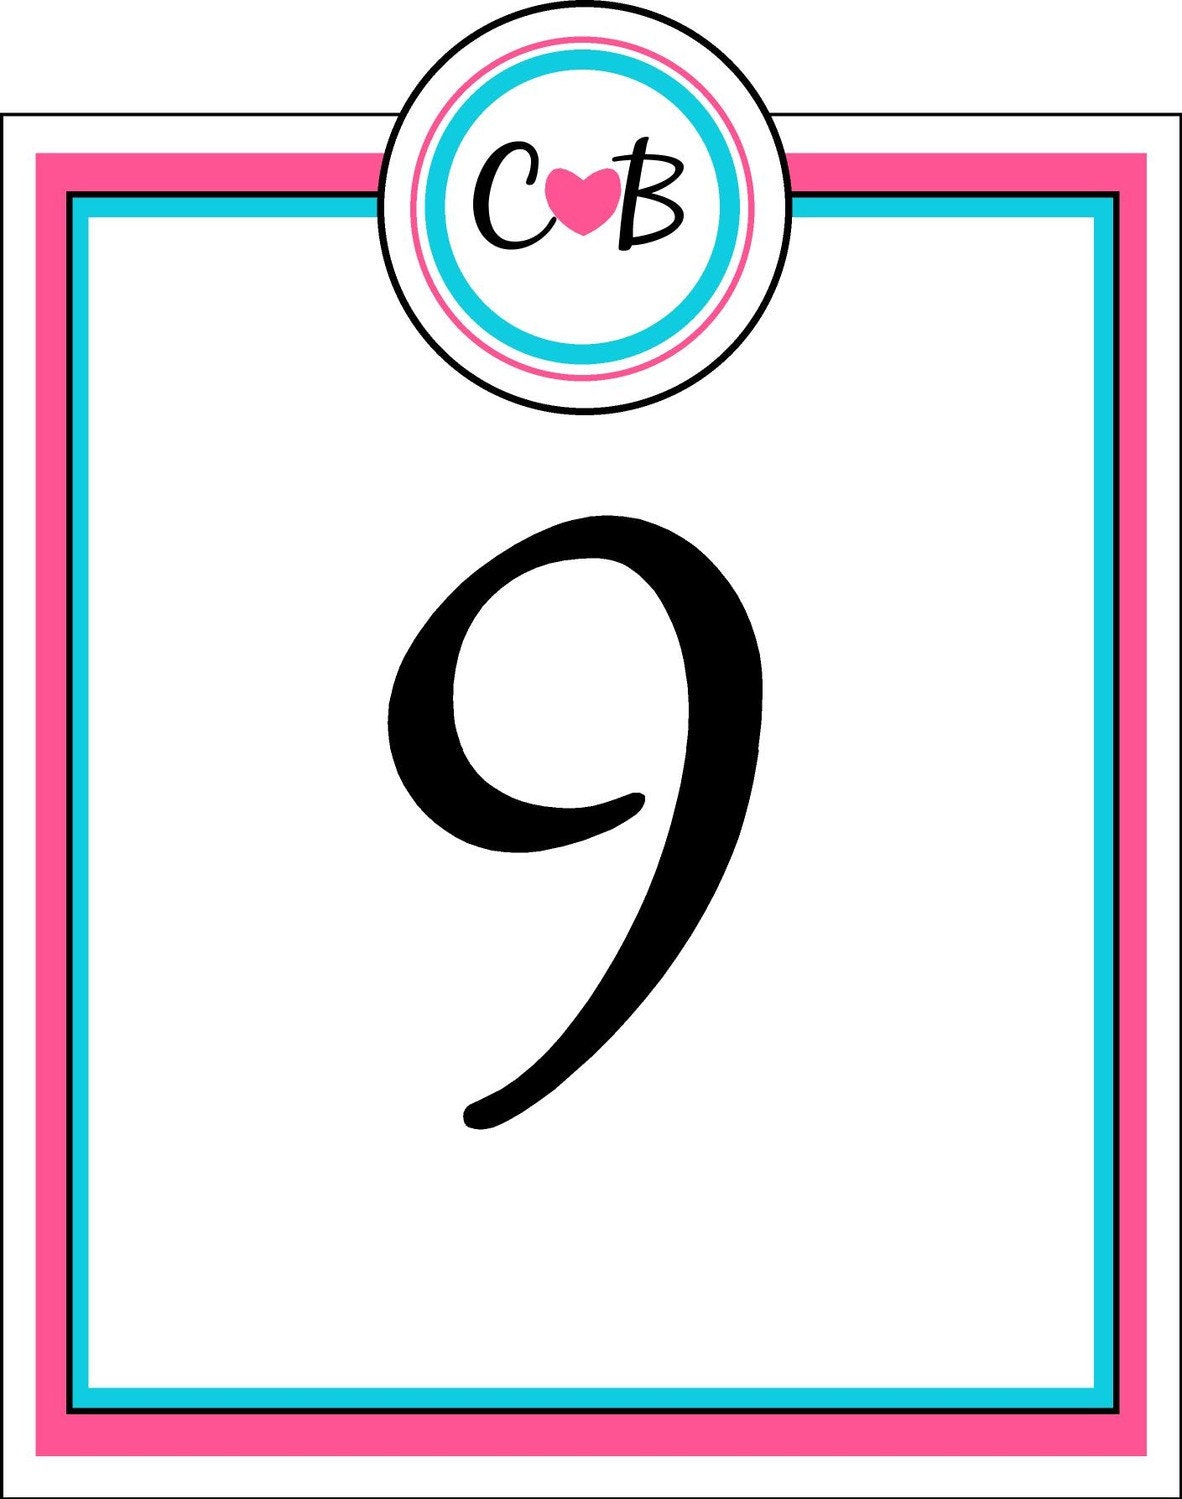 Gorgeous NonTraditional Blue and Pink Wedding Reception Table Numbers with 